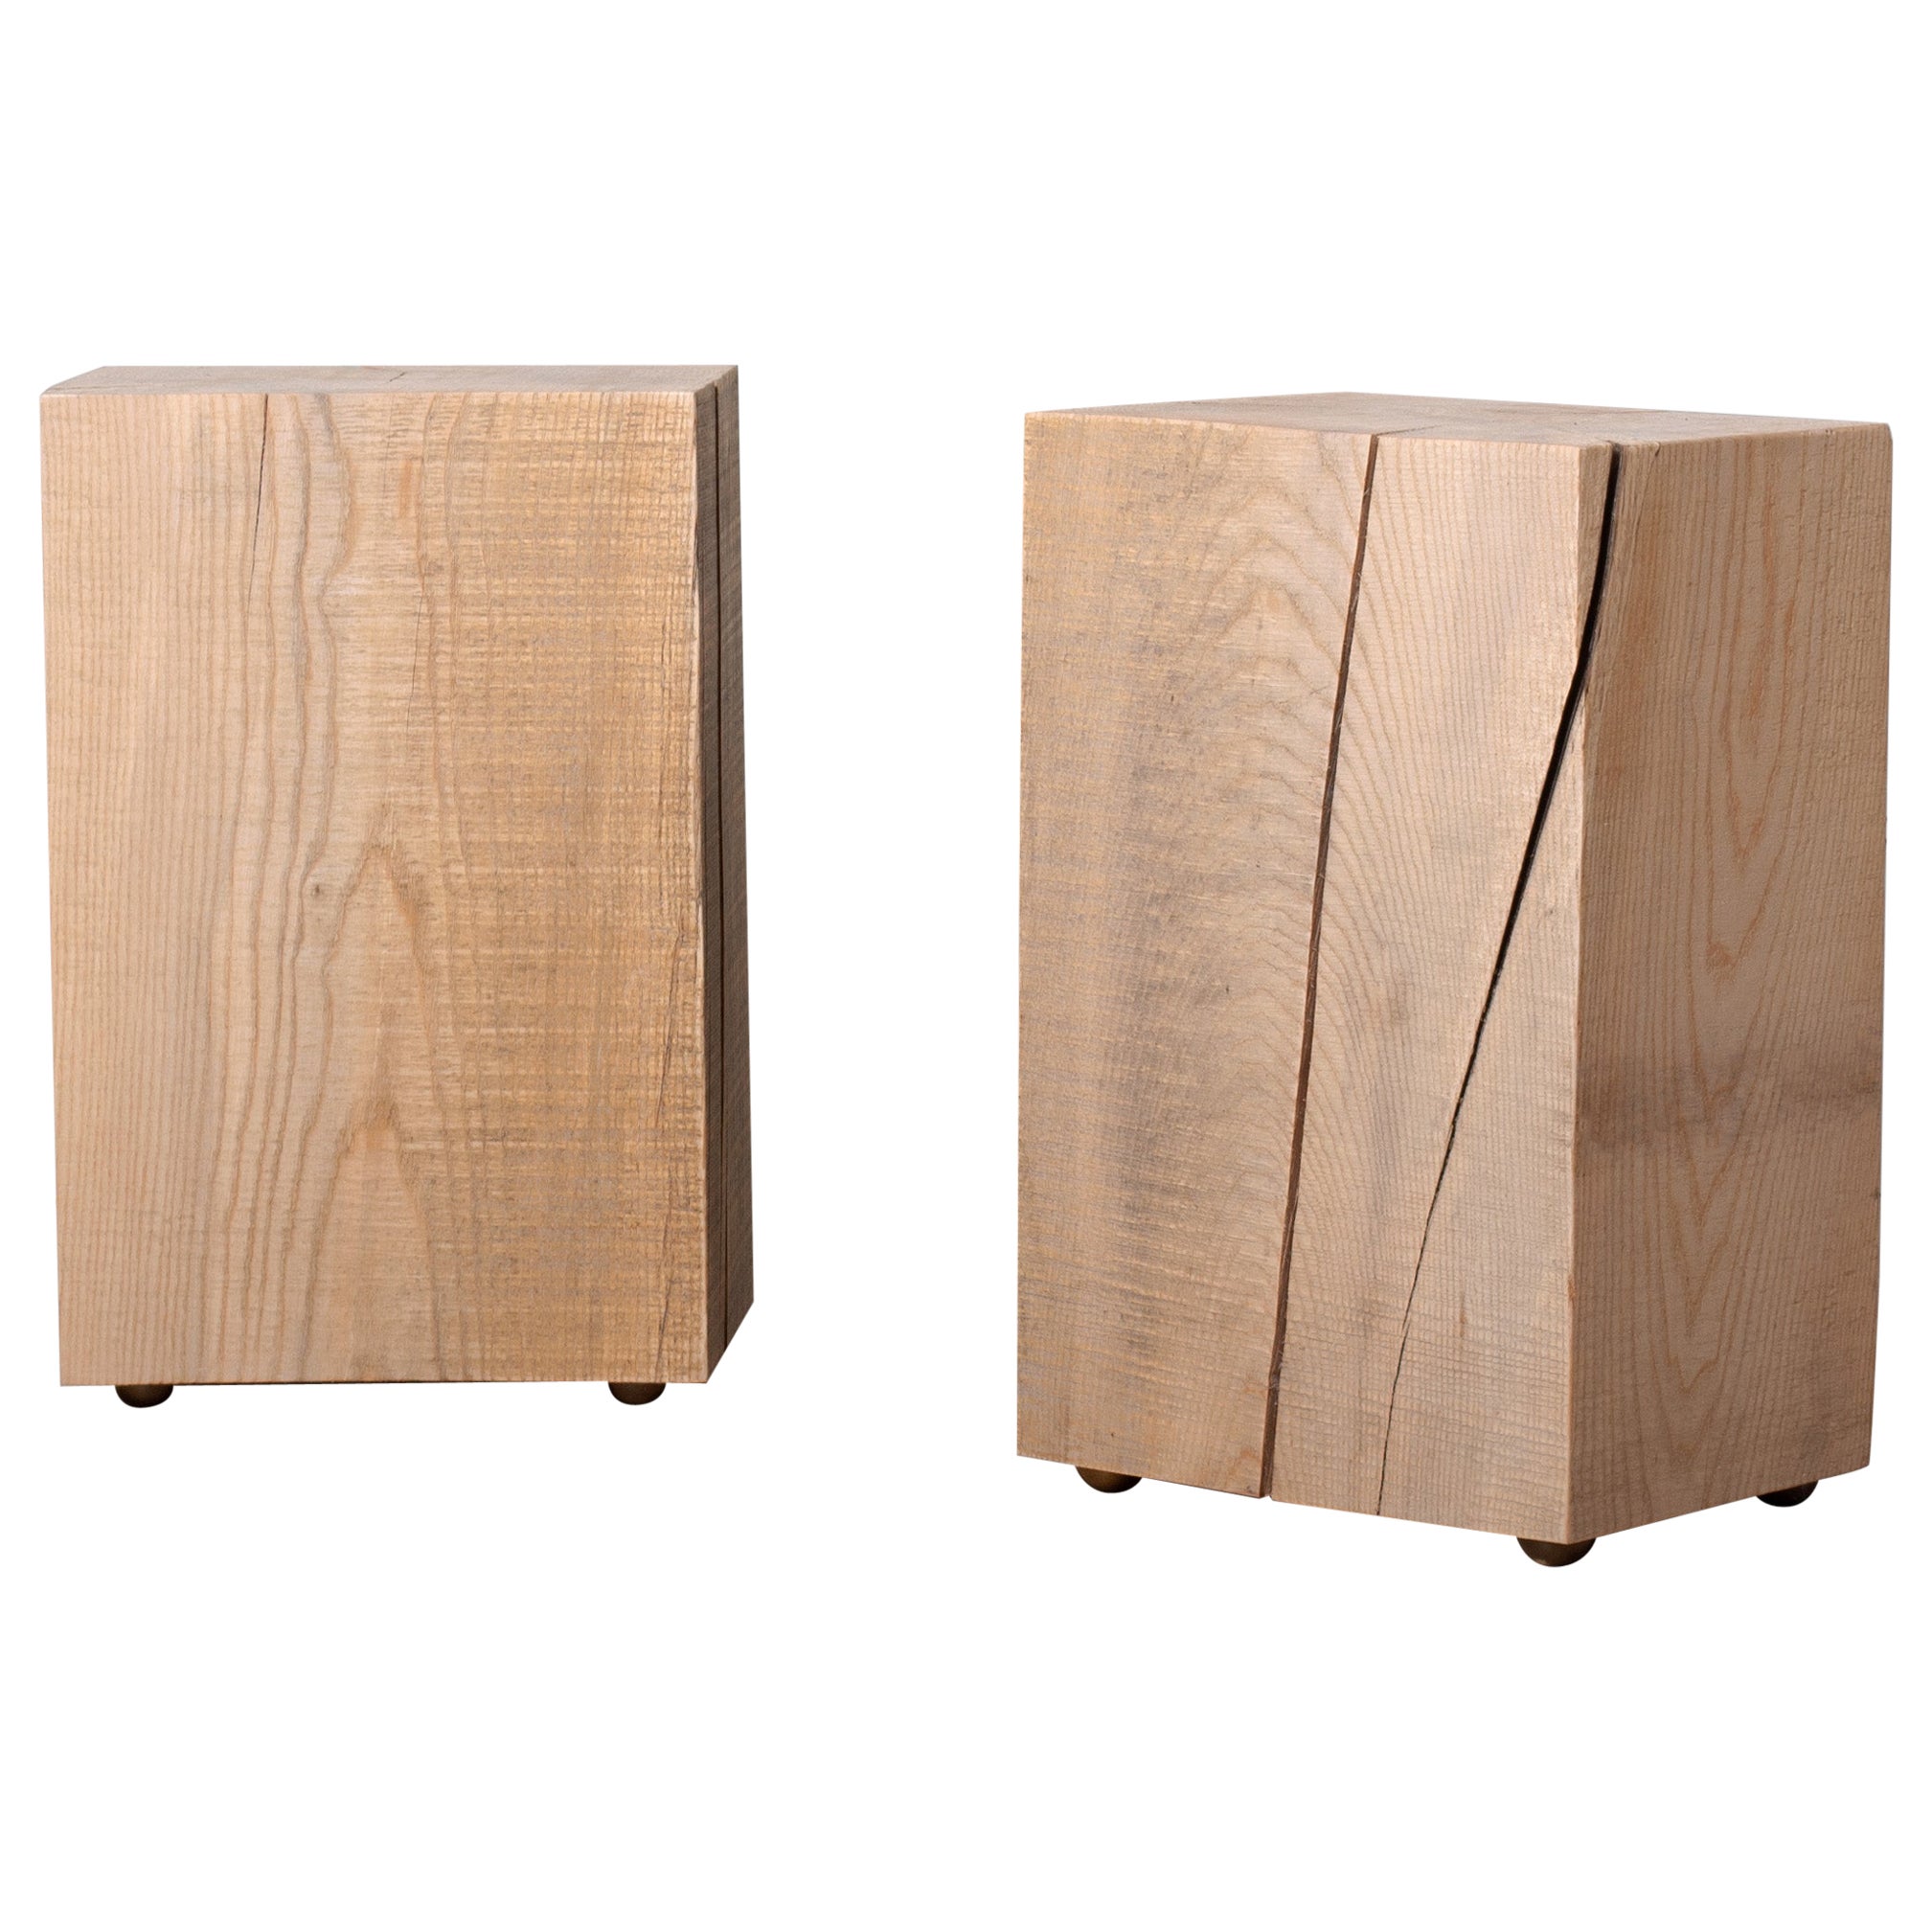 Pair of Wood Block Side Tables, Solid Ash, Brass Feet